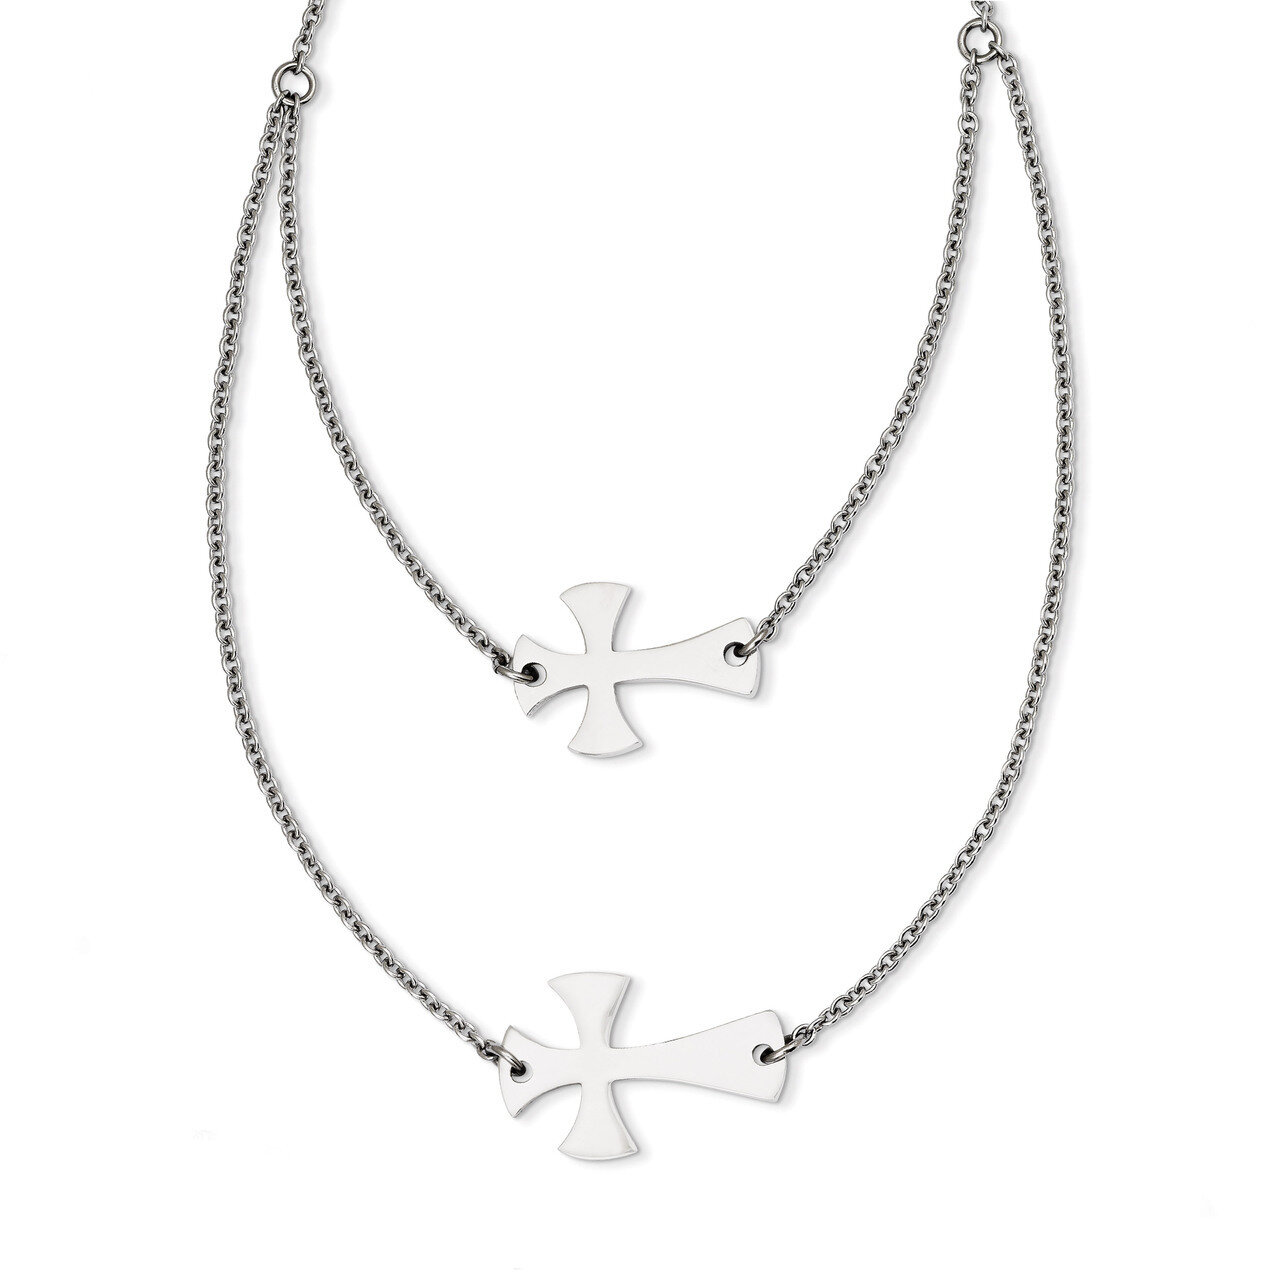 Sideways Cross Layered Necklace Stainless Steel Double SRN1185